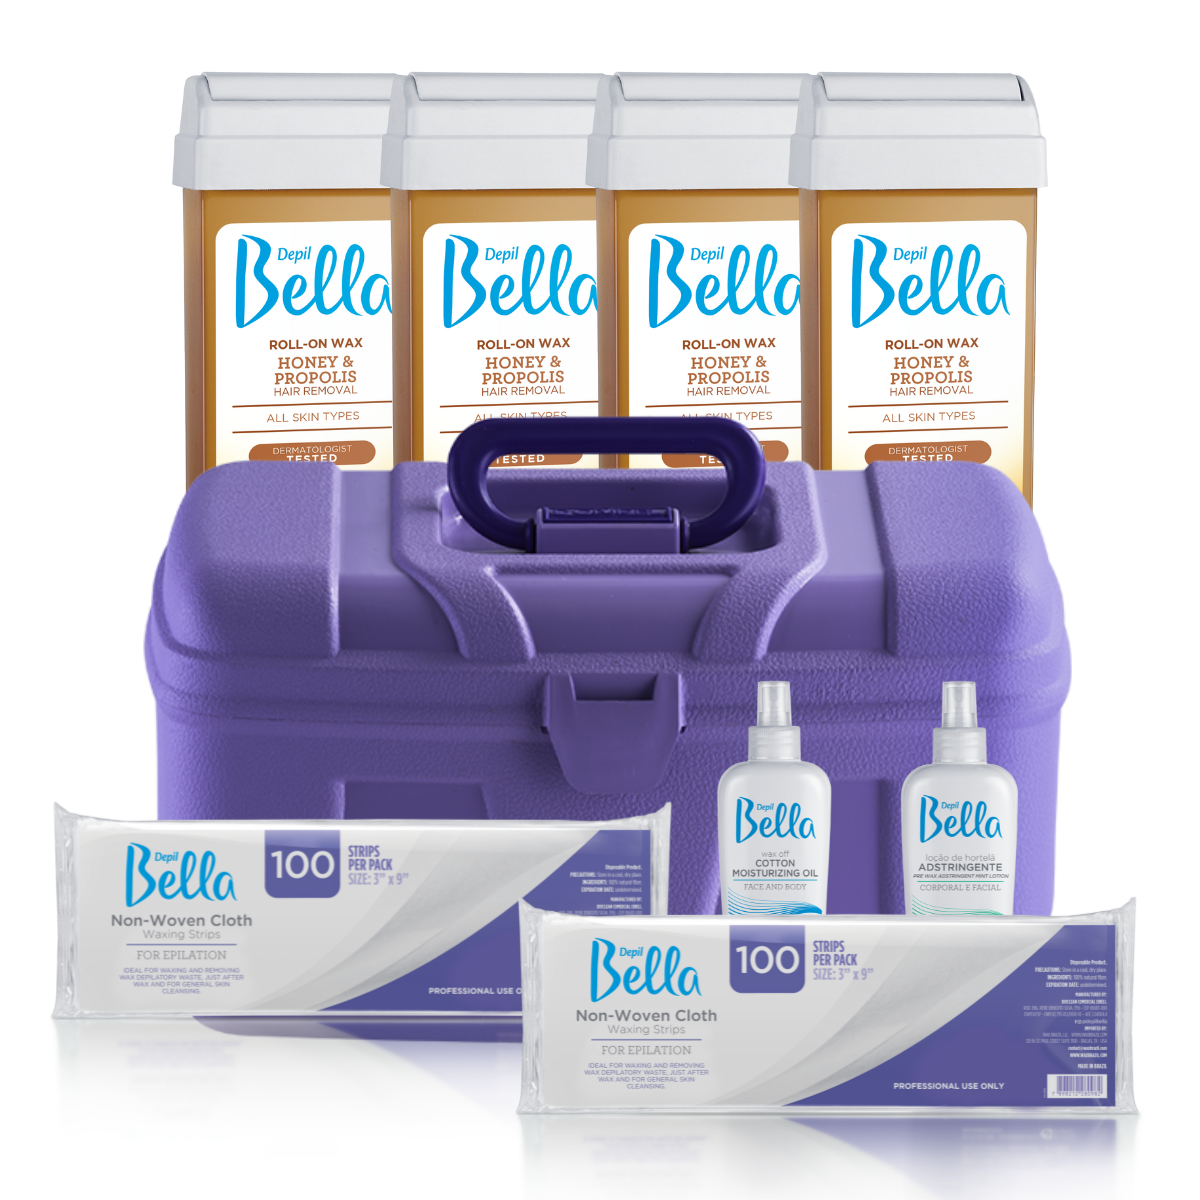 Depil Bella Bundle - 200 Non-Woven Cloths, 4 Roll-On Honey Wax, Pre-Wax Astringent Lotion, Wax-Off Moisturizing Oil, and Purple Plastic Case - Buy professional cosmetics dedicated to hair removal